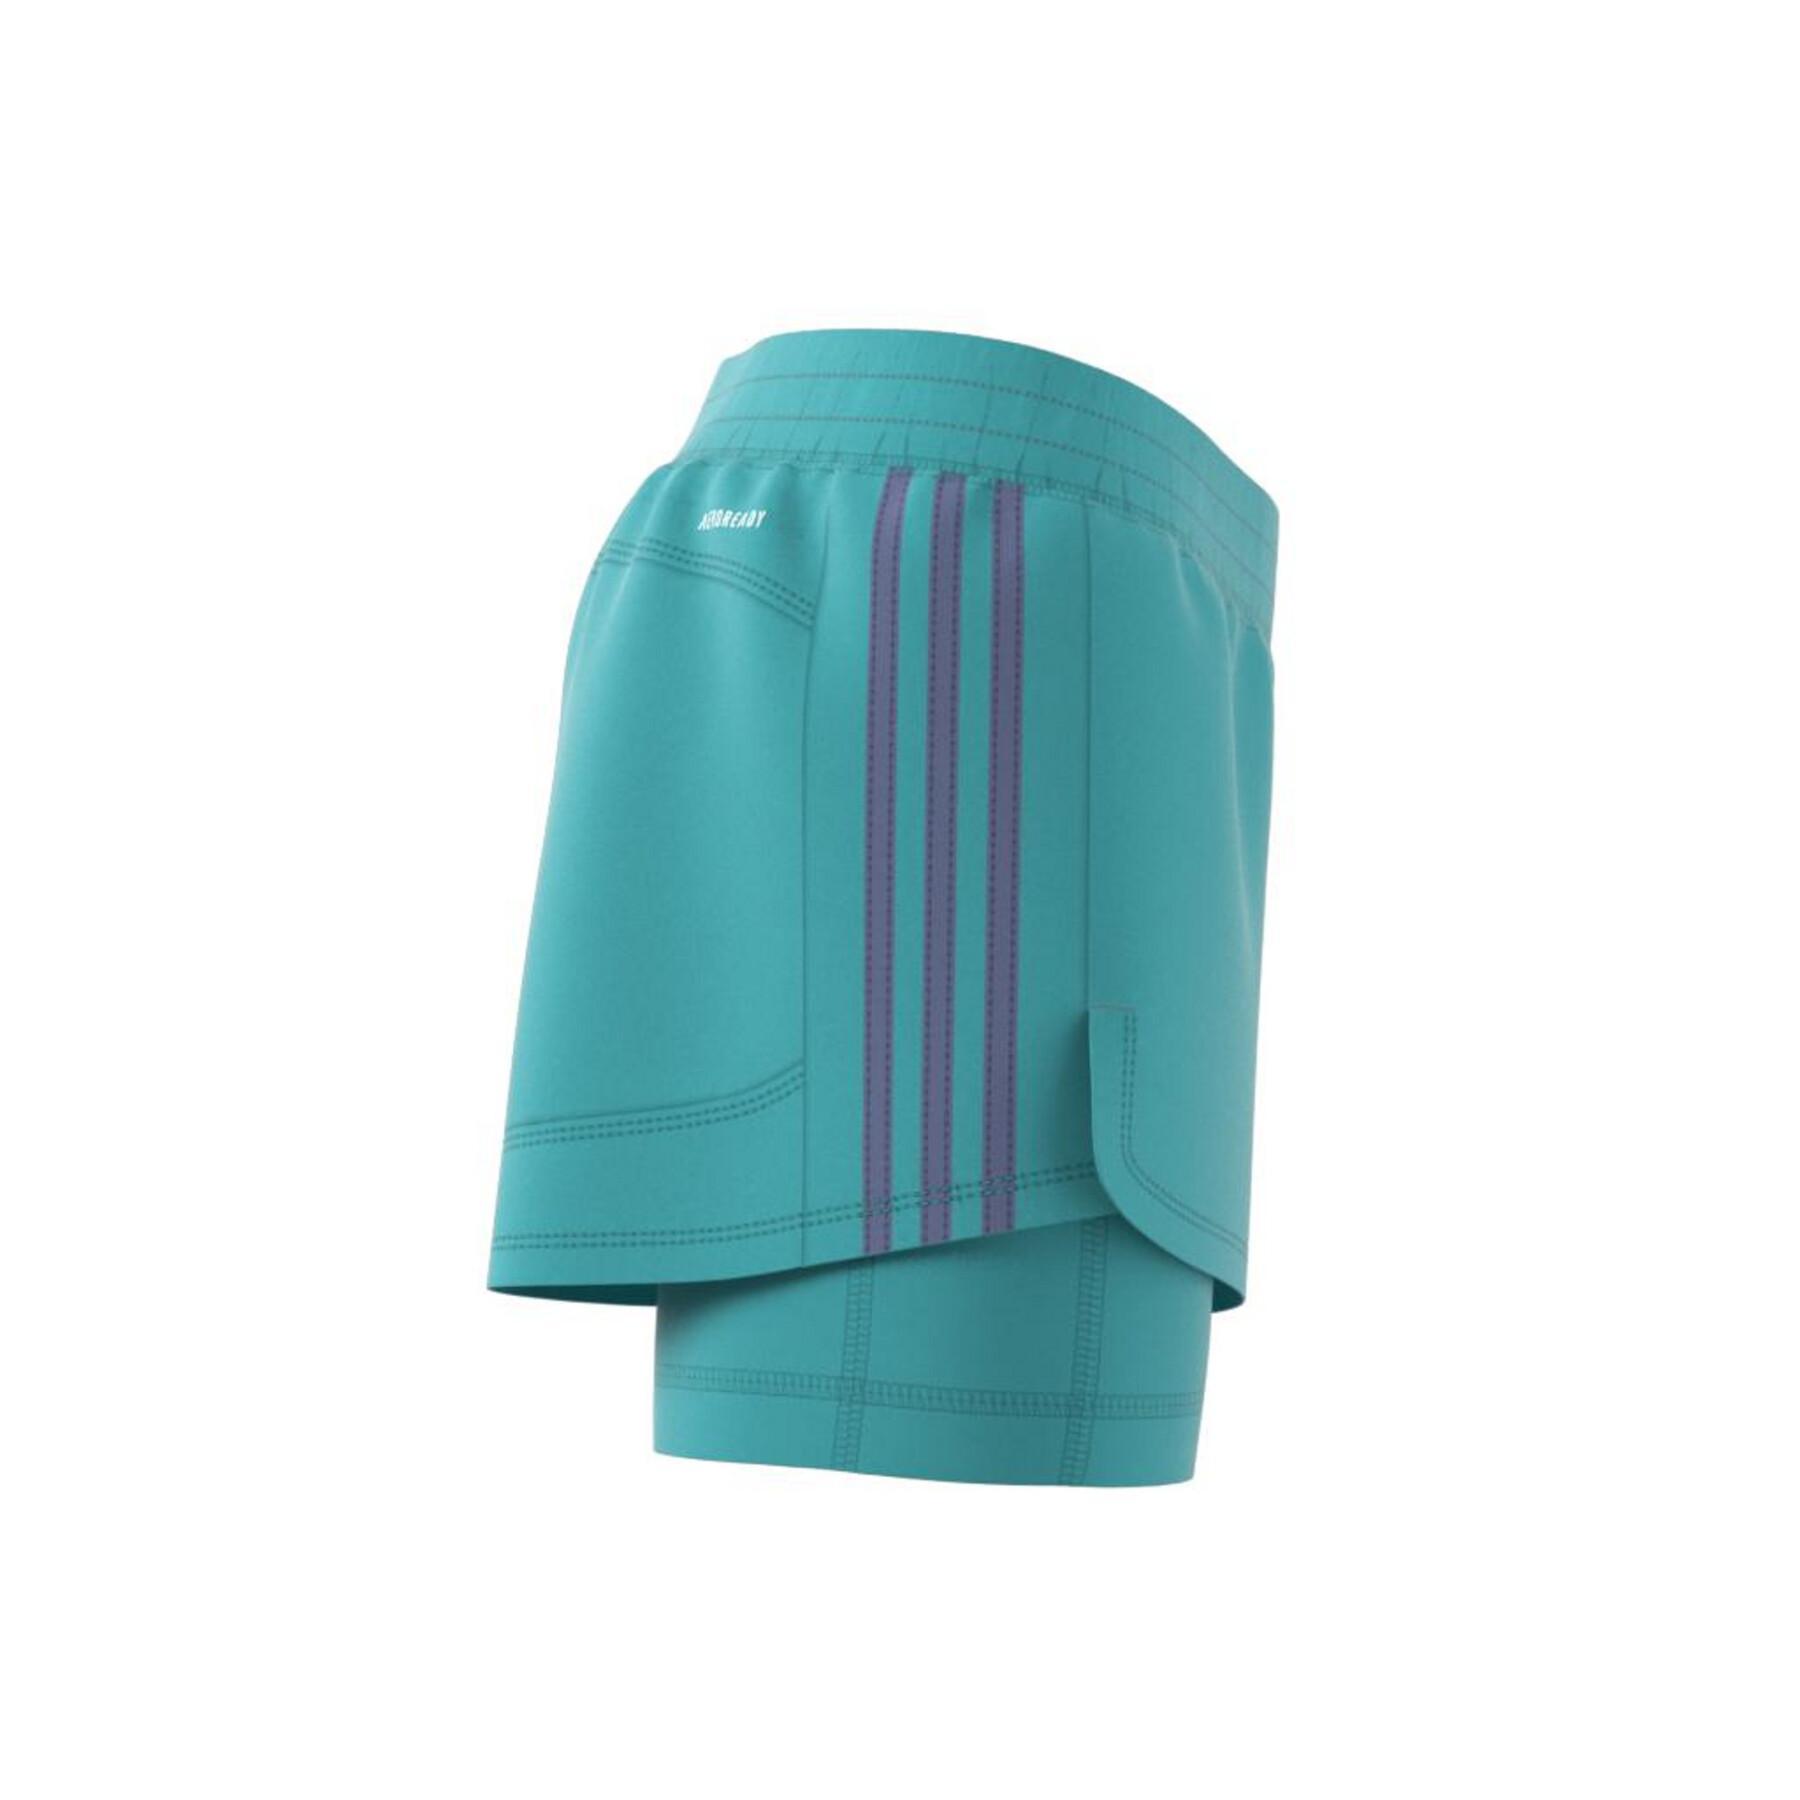 Short femme adidas Pacer Woven Two-In-One